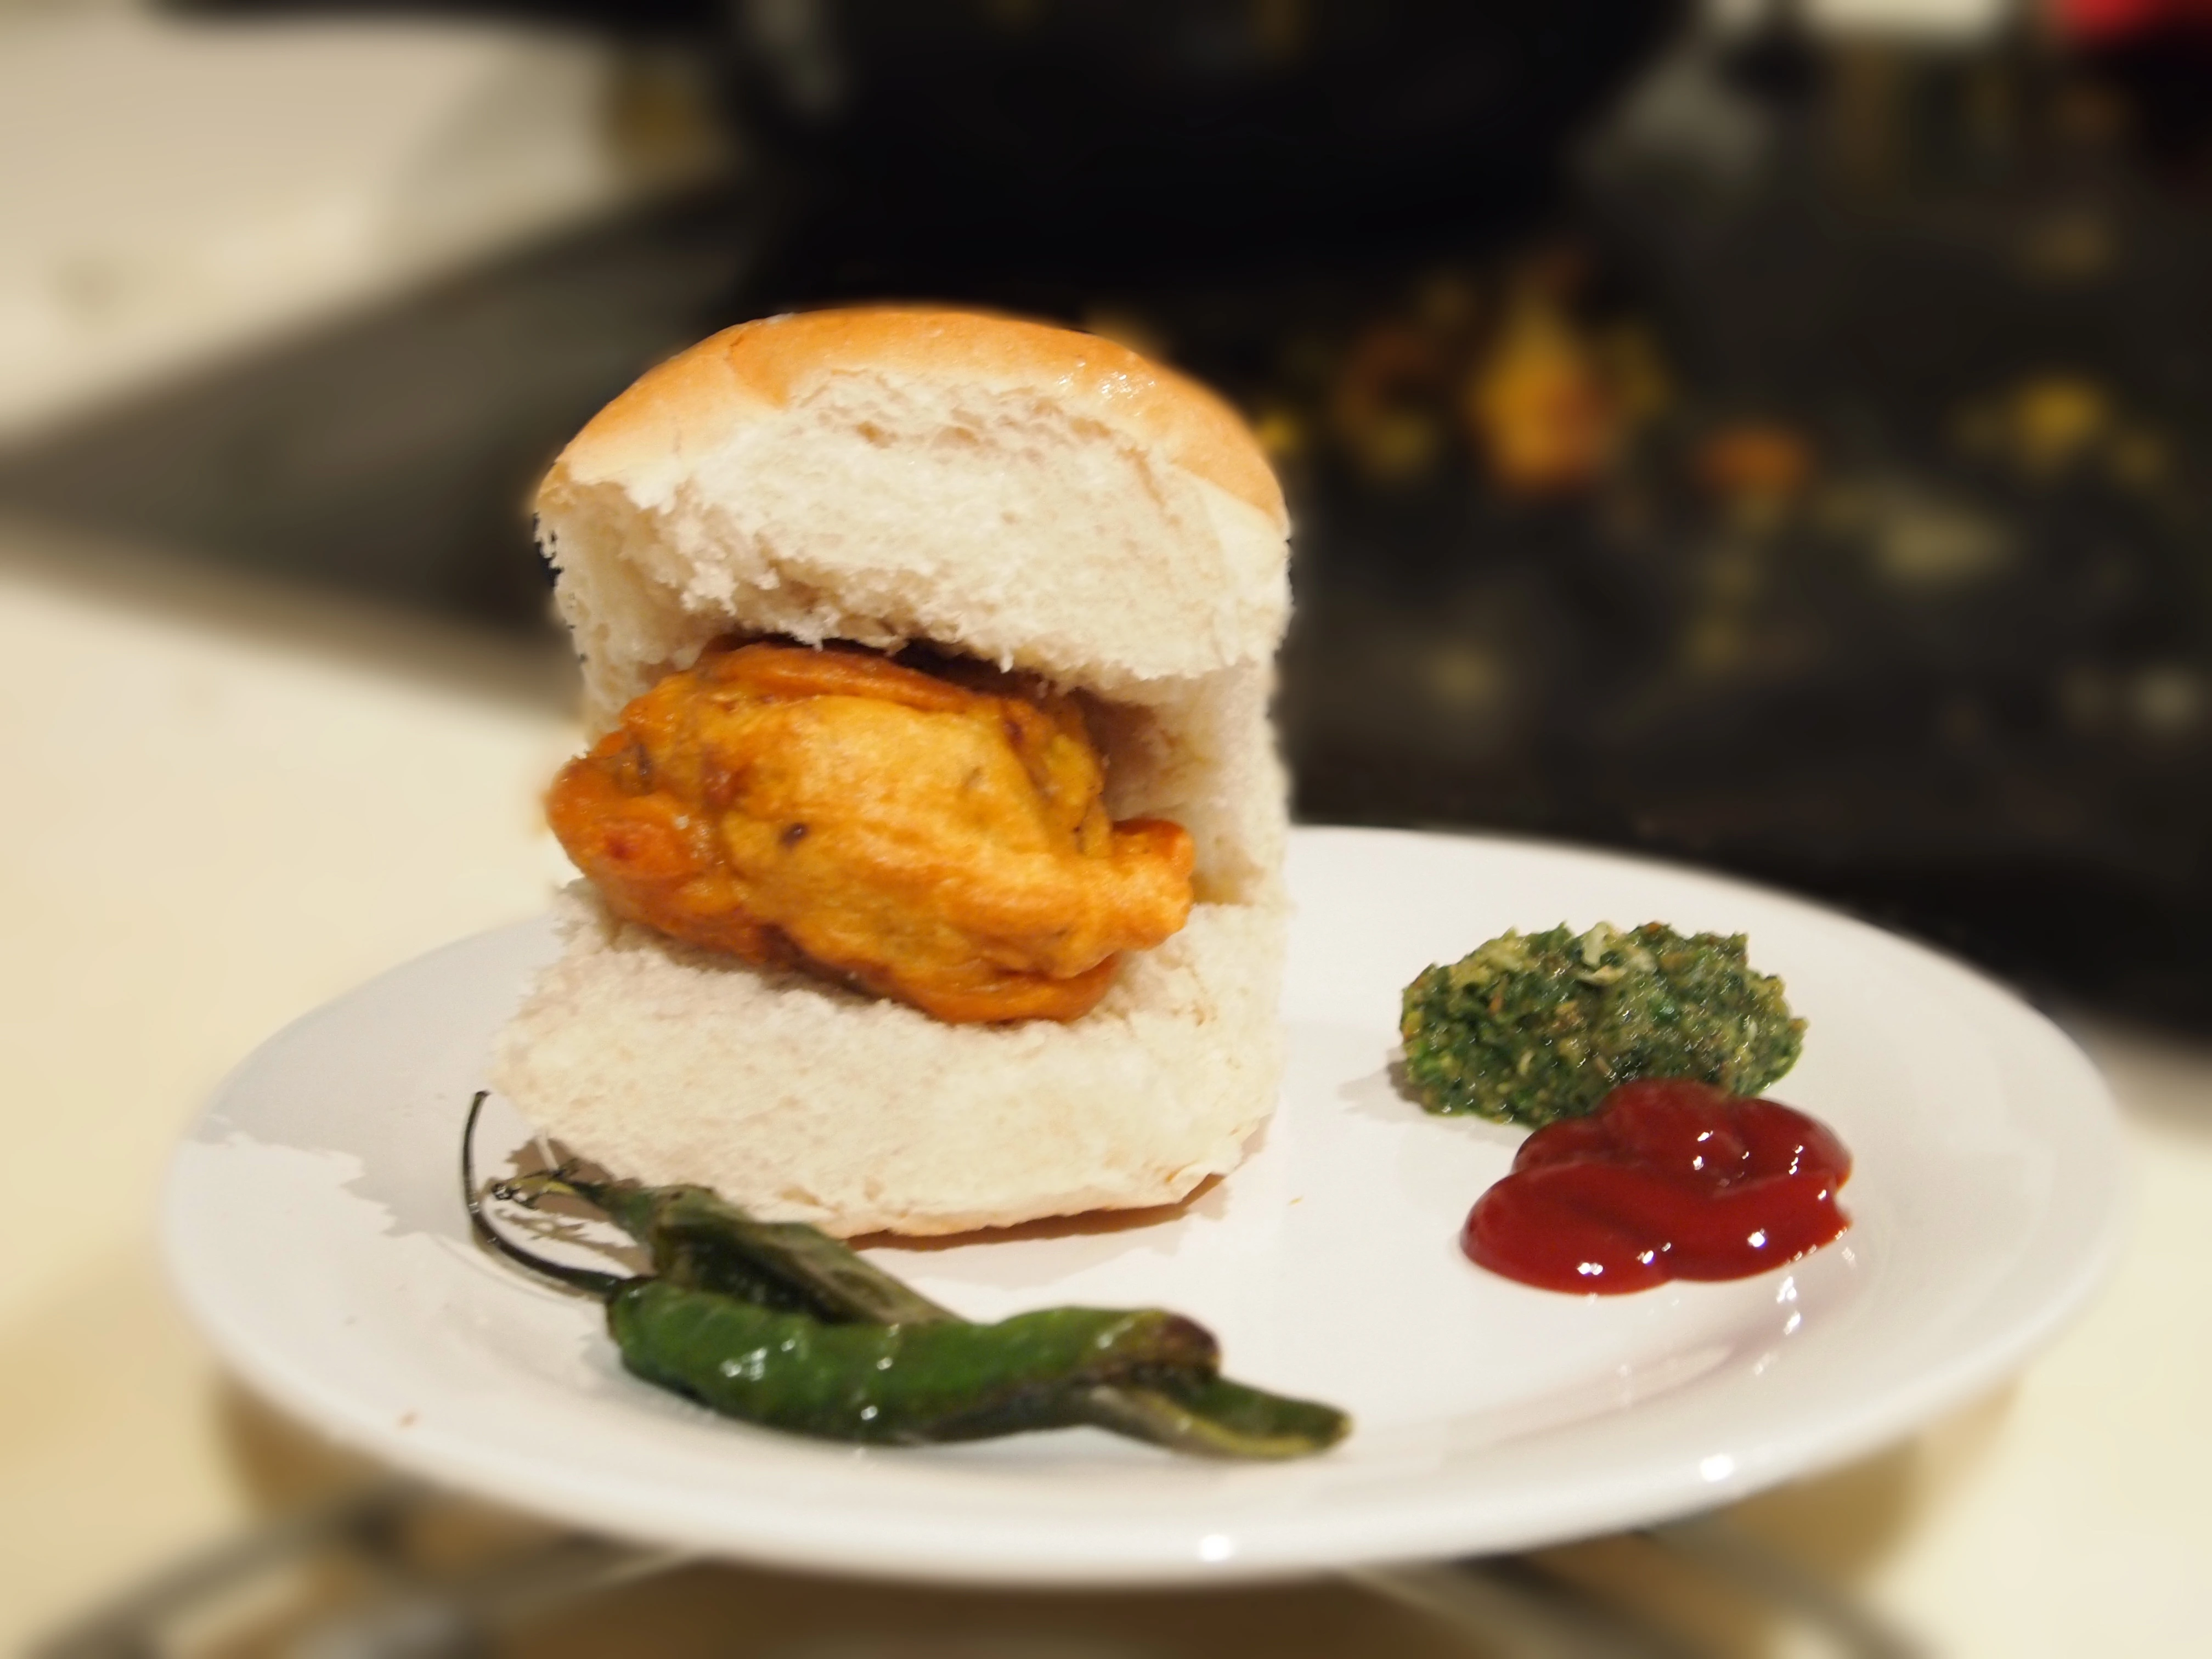 Best vada pav joints in Mumbai, as picked by the city's locals